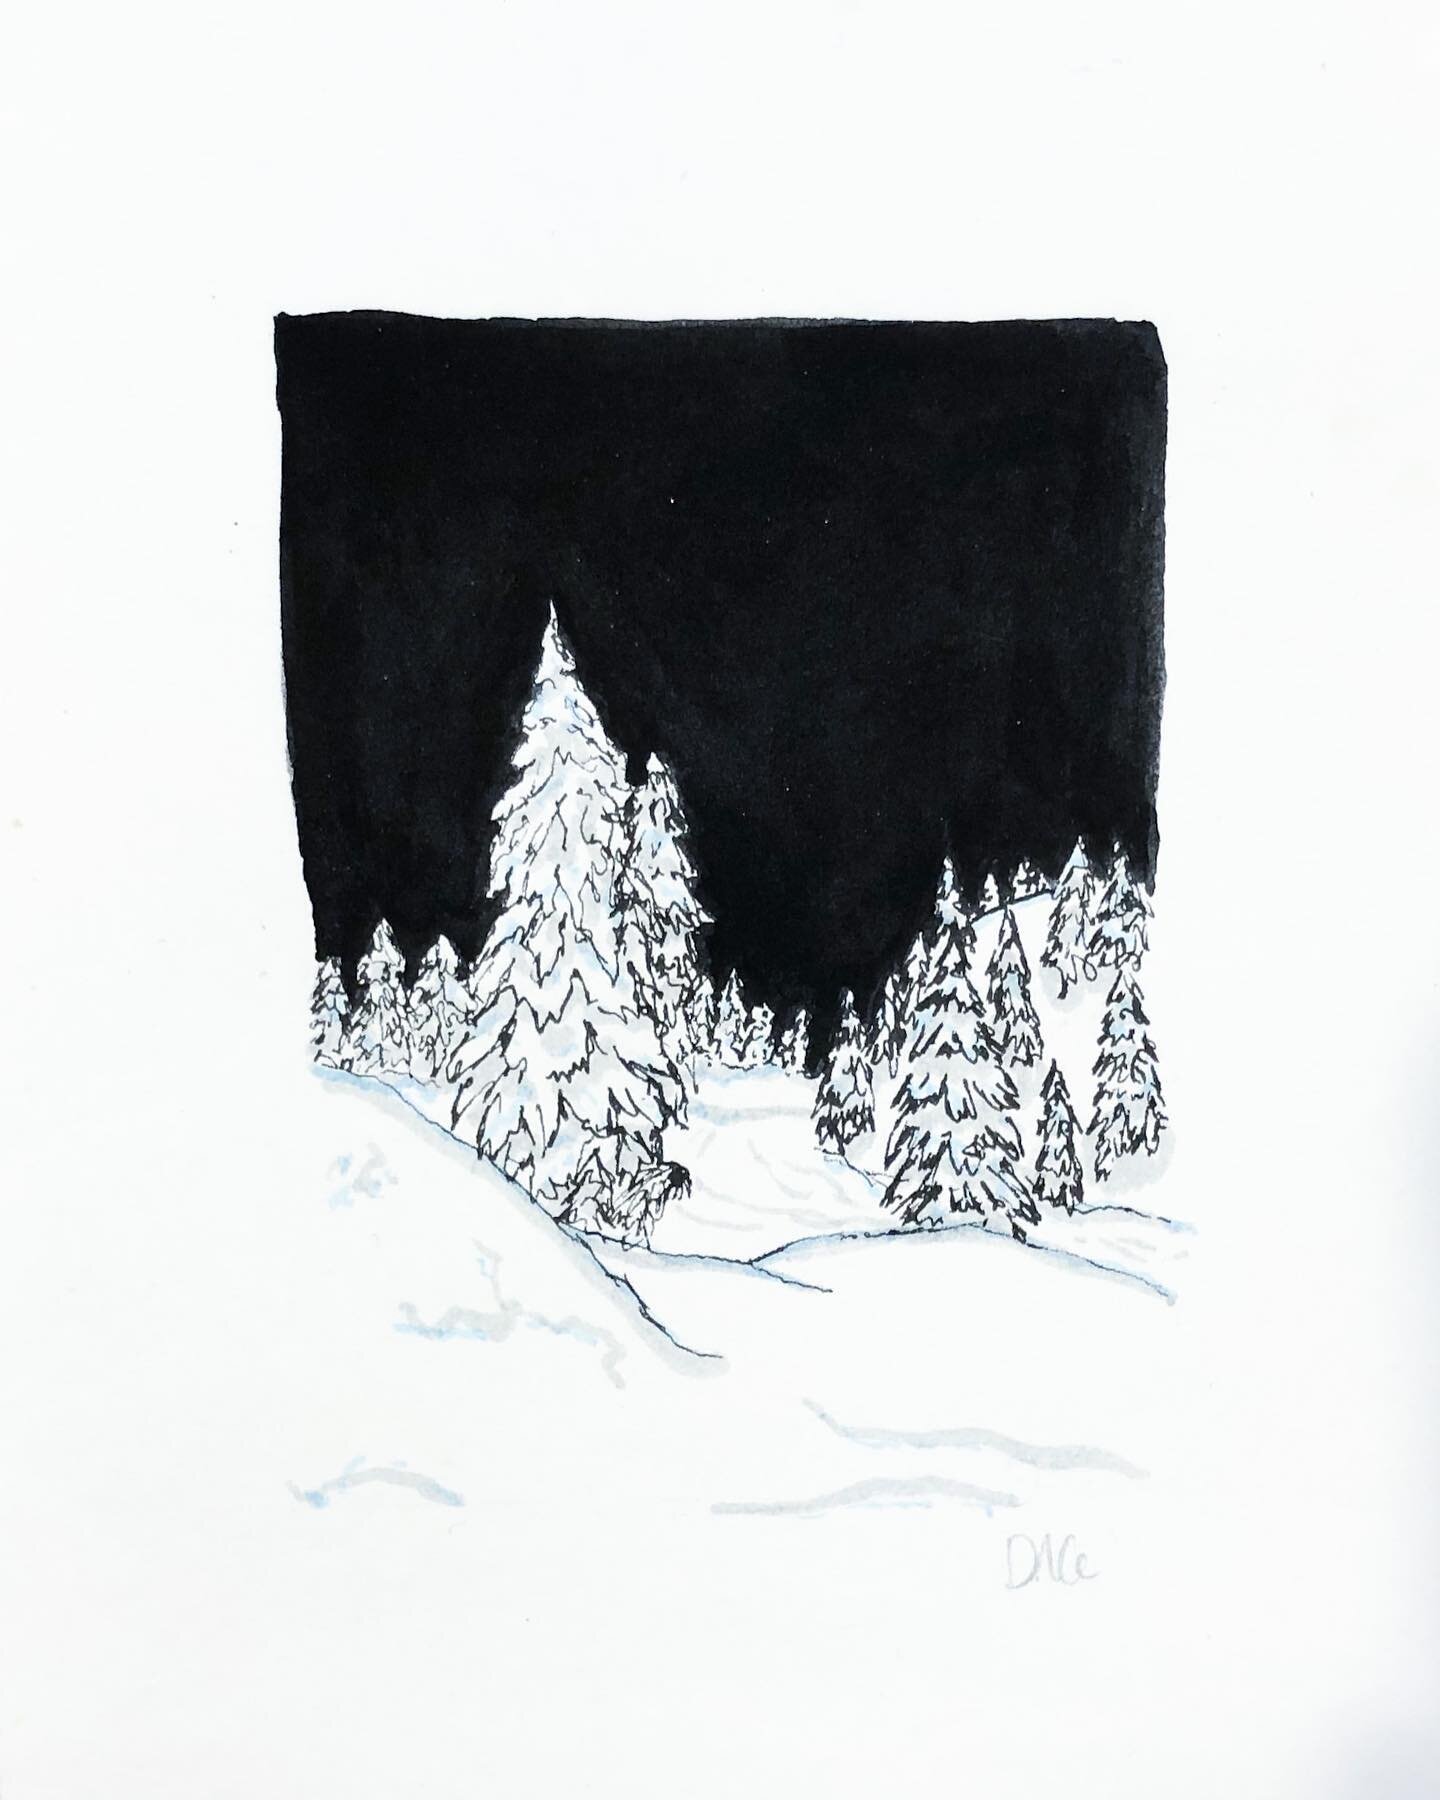 A doodle of my favourite spot on @mtseymour 🏔 

Todays #peachtober22 prompt &lsquo;trees&rsquo; 🌲